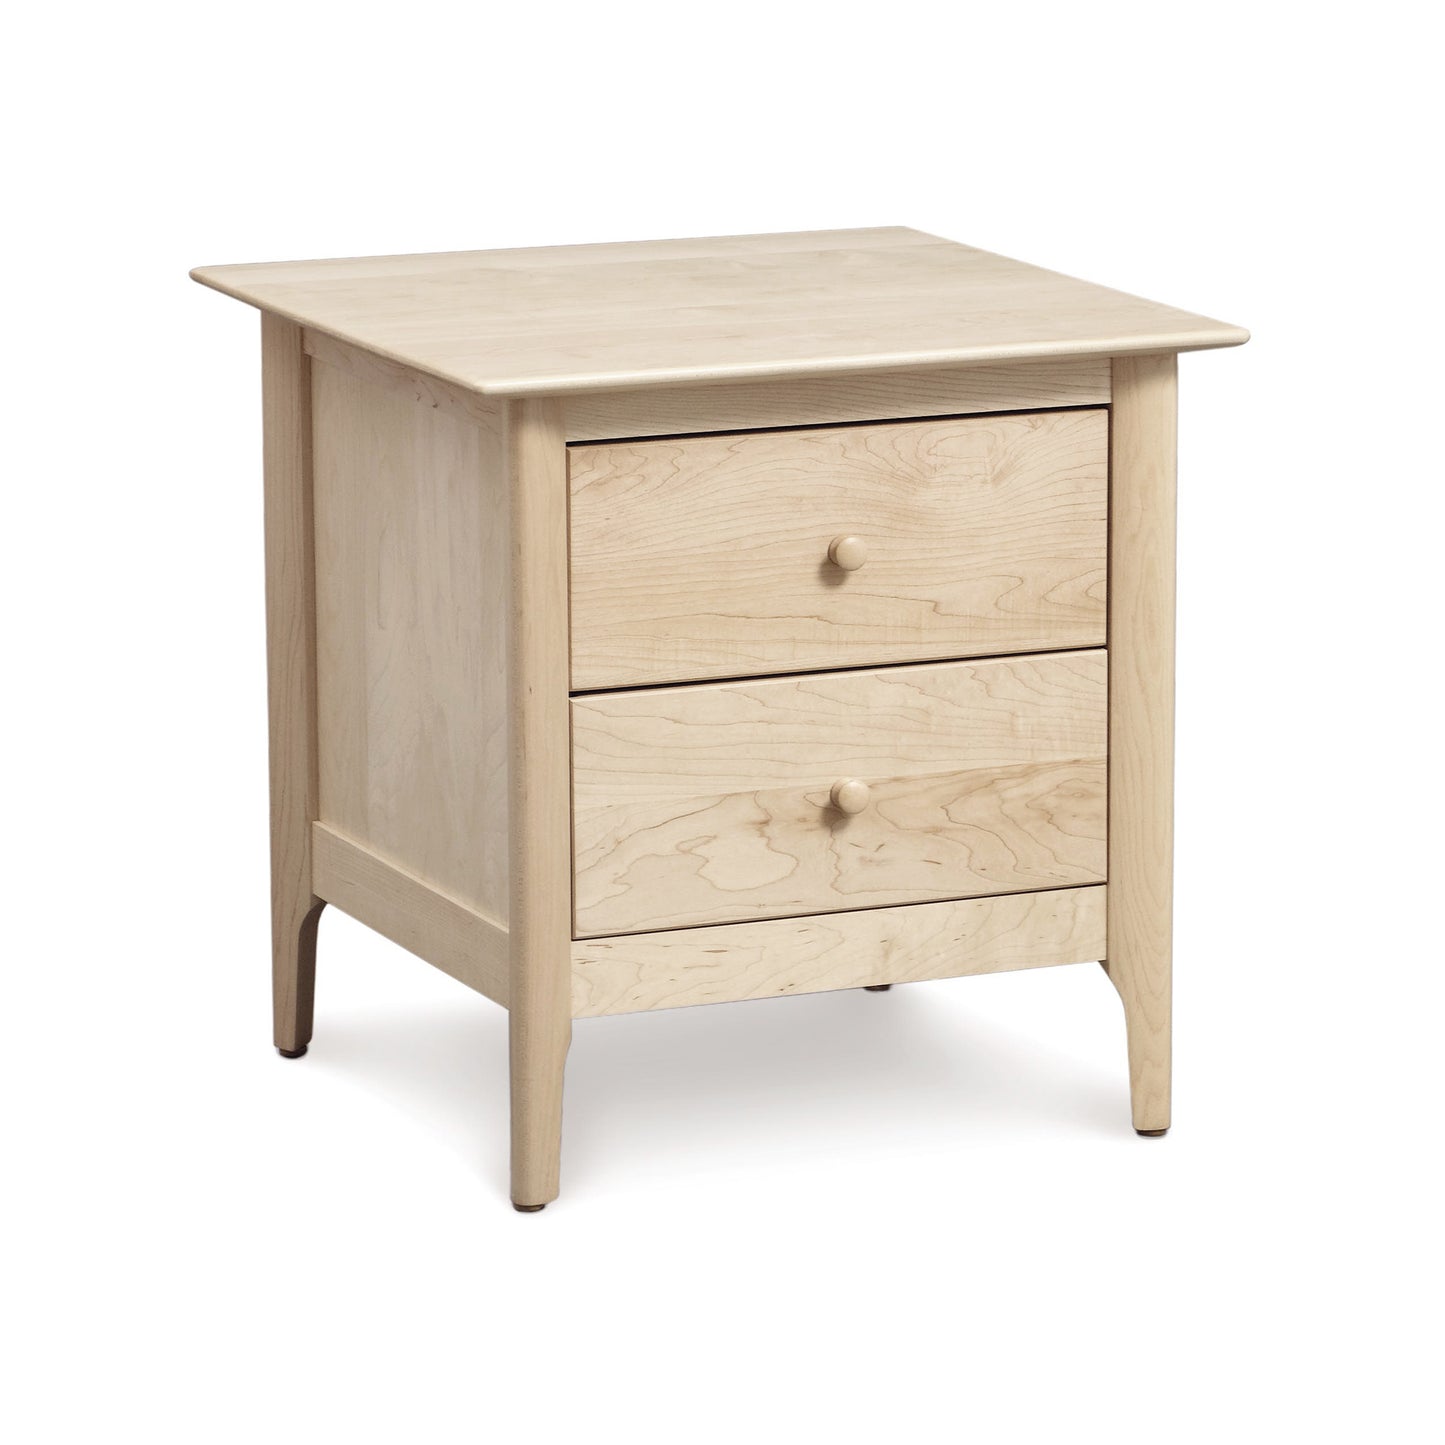 The Copeland Furniture Sarah 2-Drawer Nightstand from the Shaker-style Sarah Furniture Collection is a handmade nightstand with two drawers. It features a clean white background.